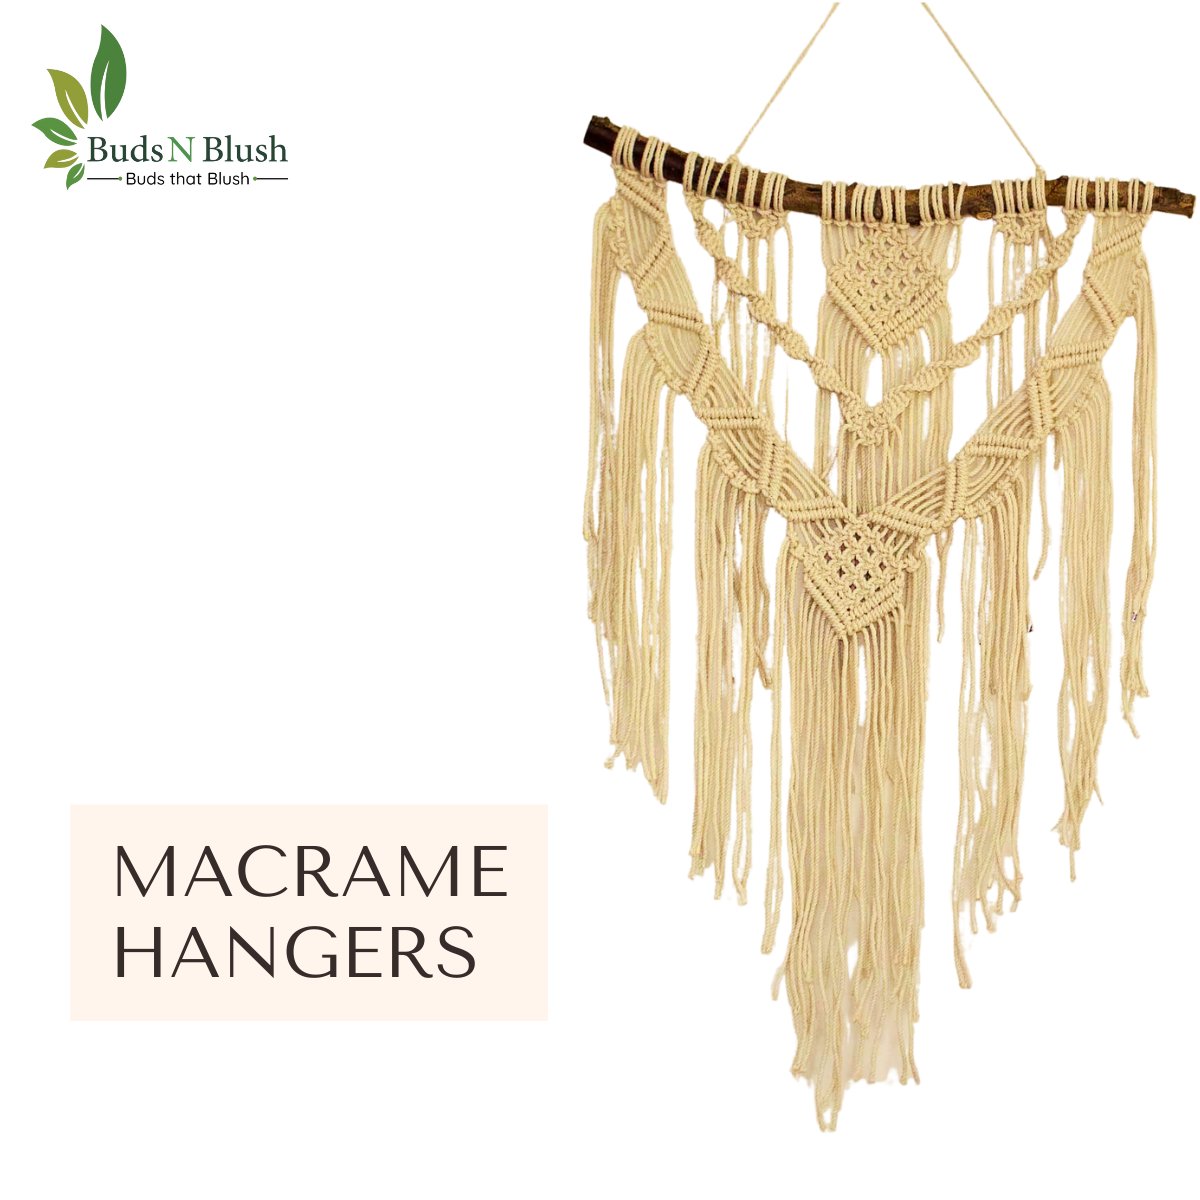 Bring Bohemian vibes in your home with our rustic and unique macrame patterns